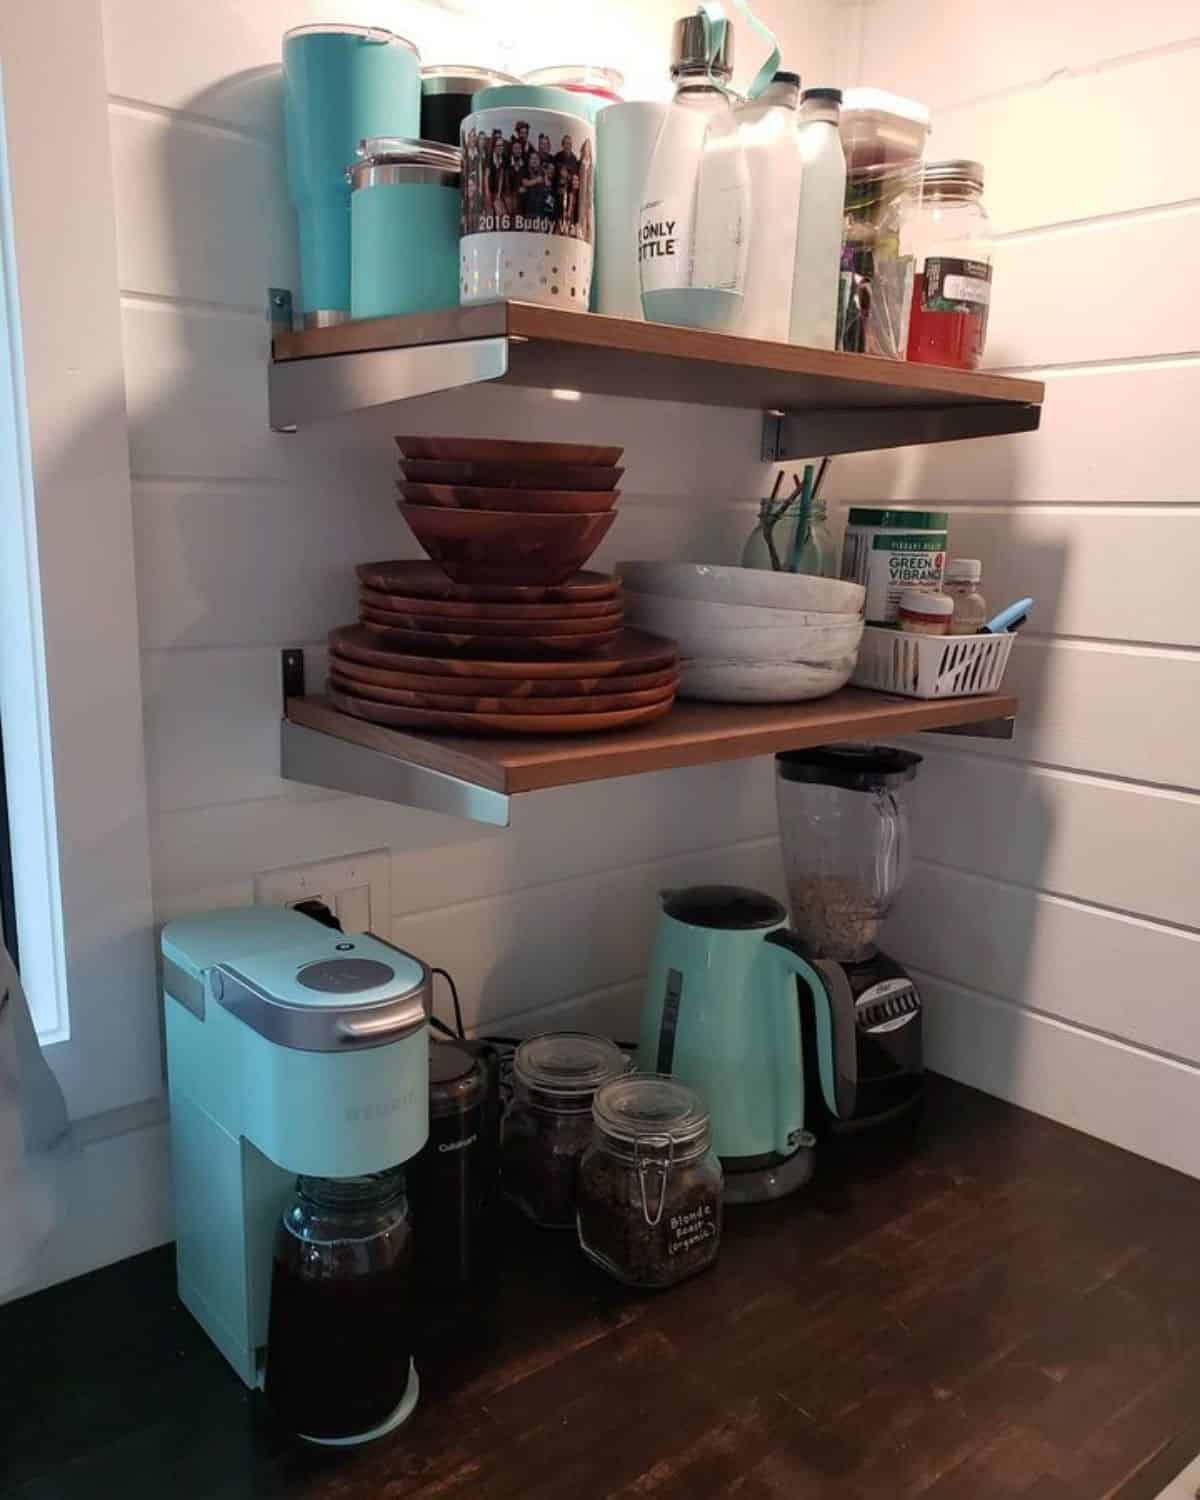 teal coffee maker and kettle on counter in kitchen with butcherblock counters and shelves against white shiplap wall